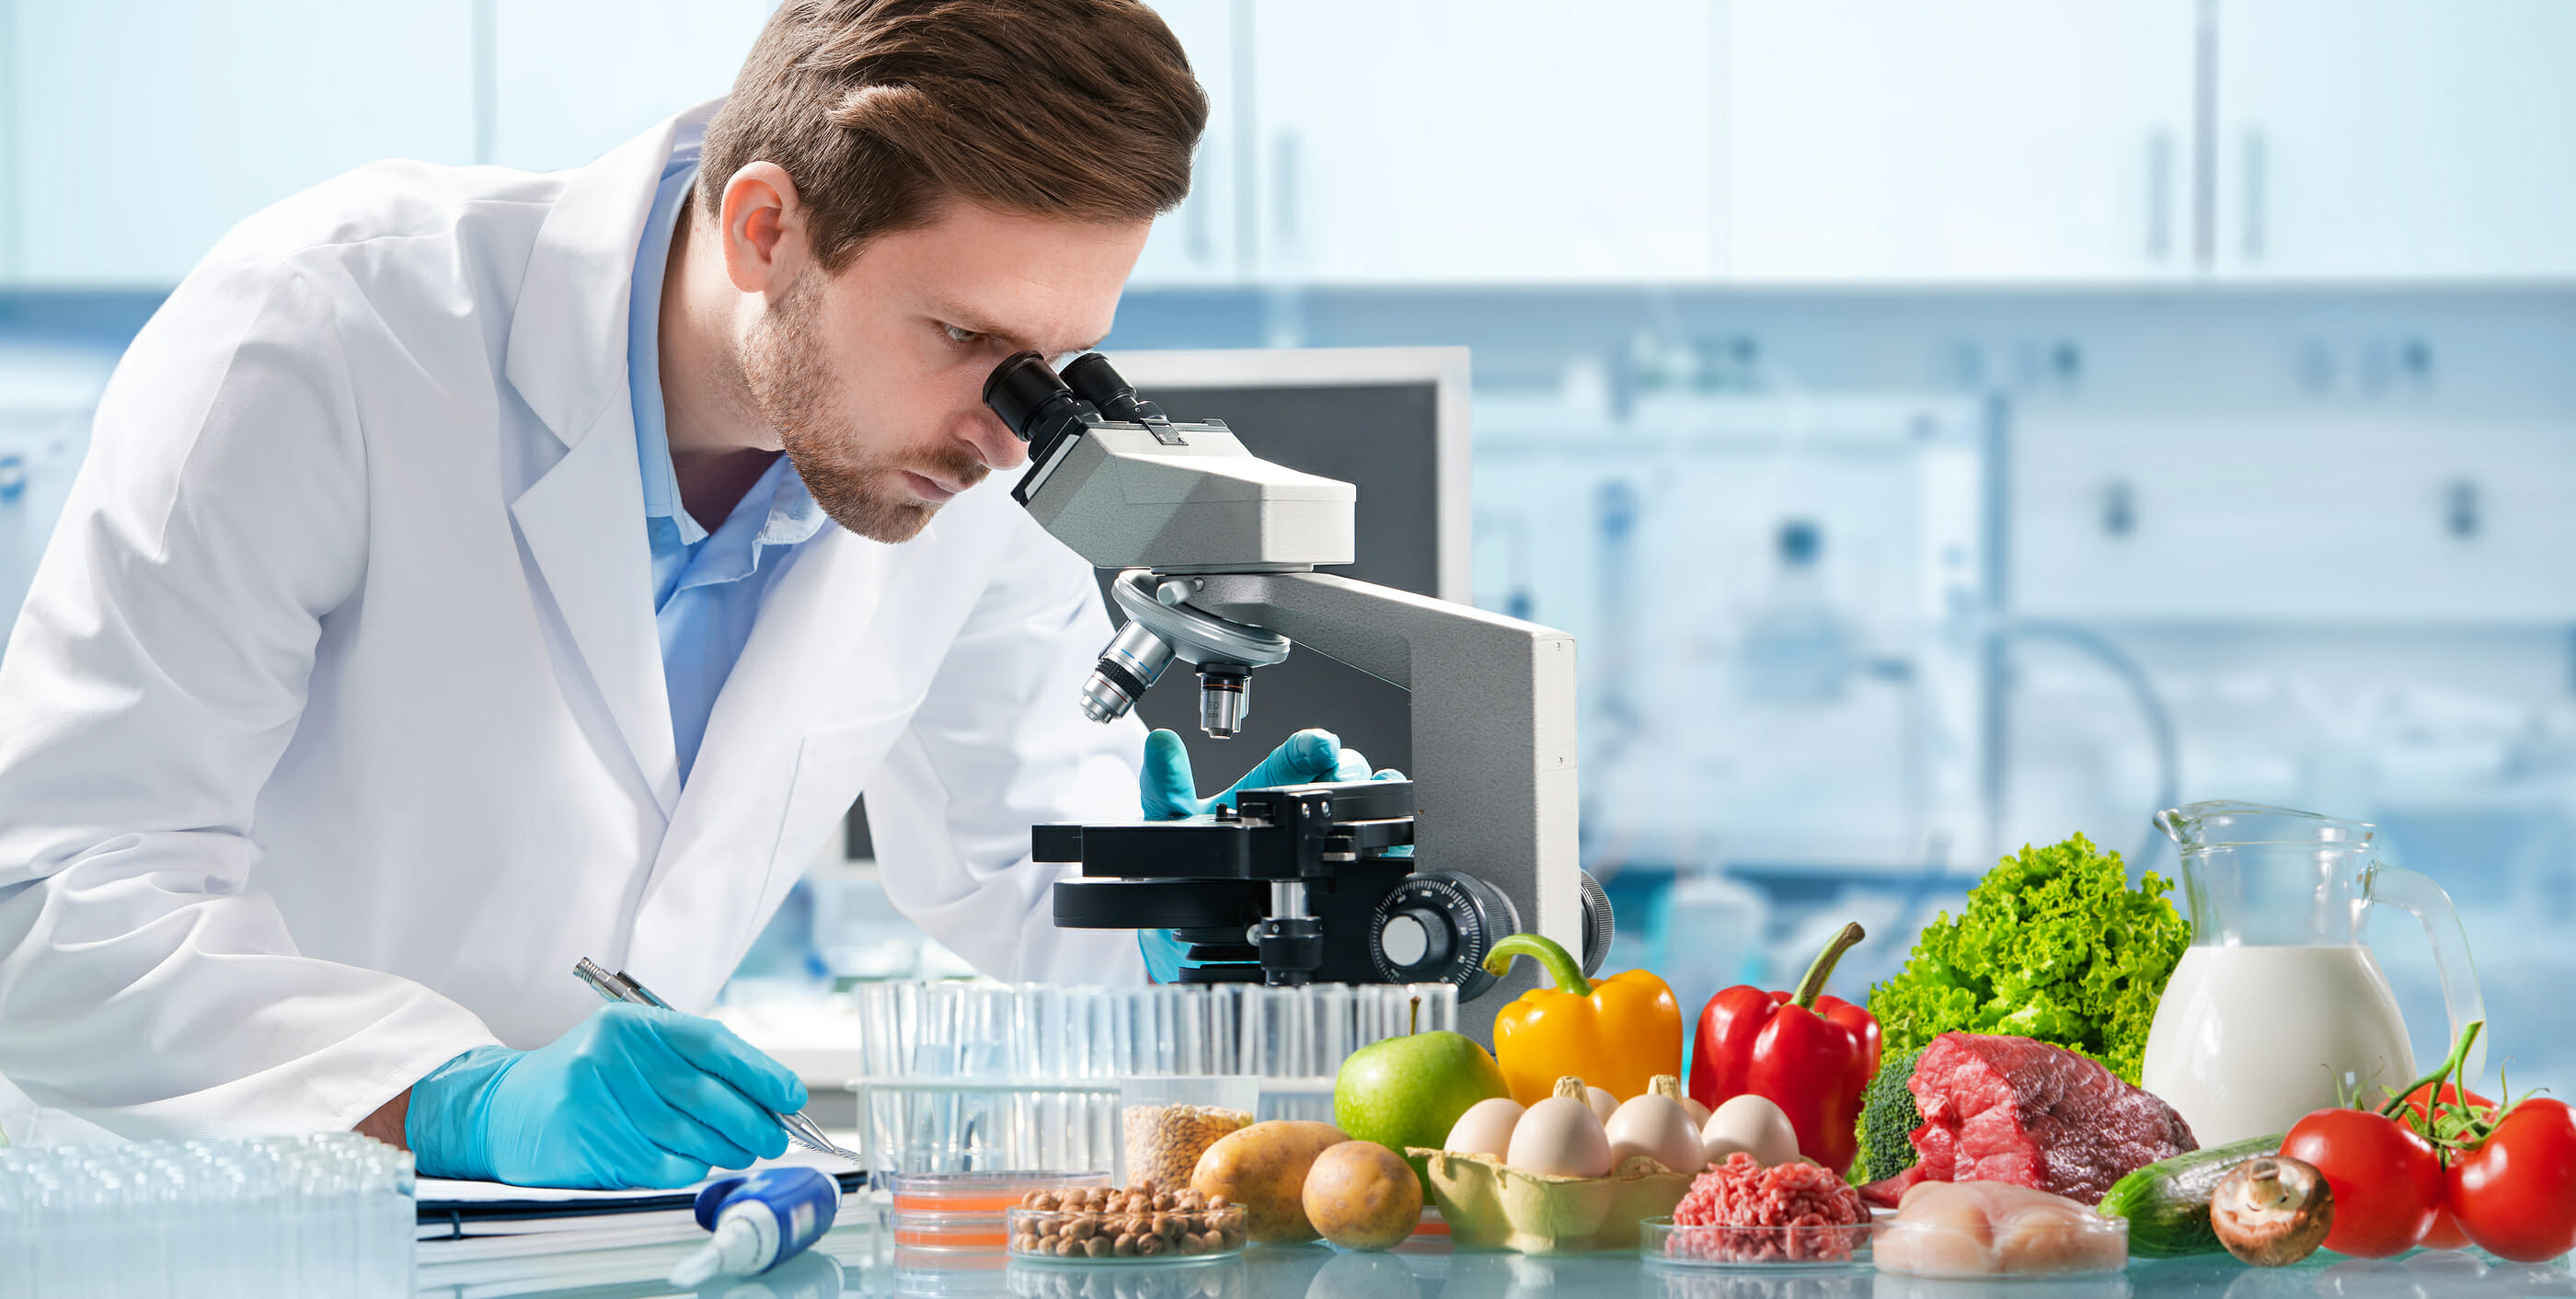 Food Safety Testing Market Research Report, Trends, Demand, Key Player Analysis and Forecast 2023-2028